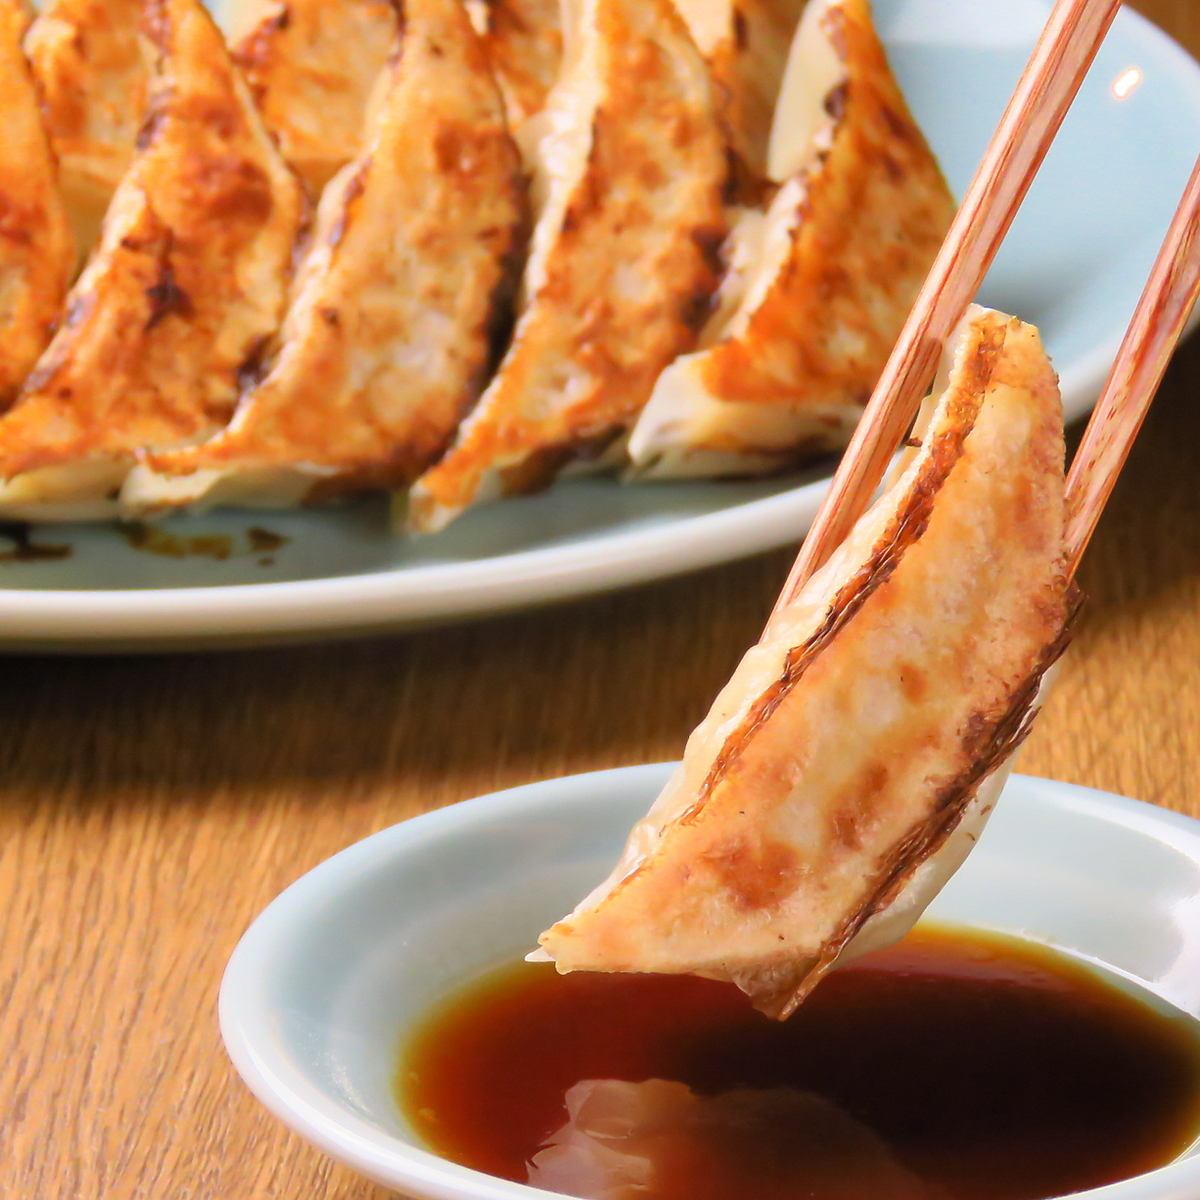 ≪All-you-can-eat grilled dumplings≫ Course / All-you-can-drink with 120 minutes / 7 dishes 3,500 yen